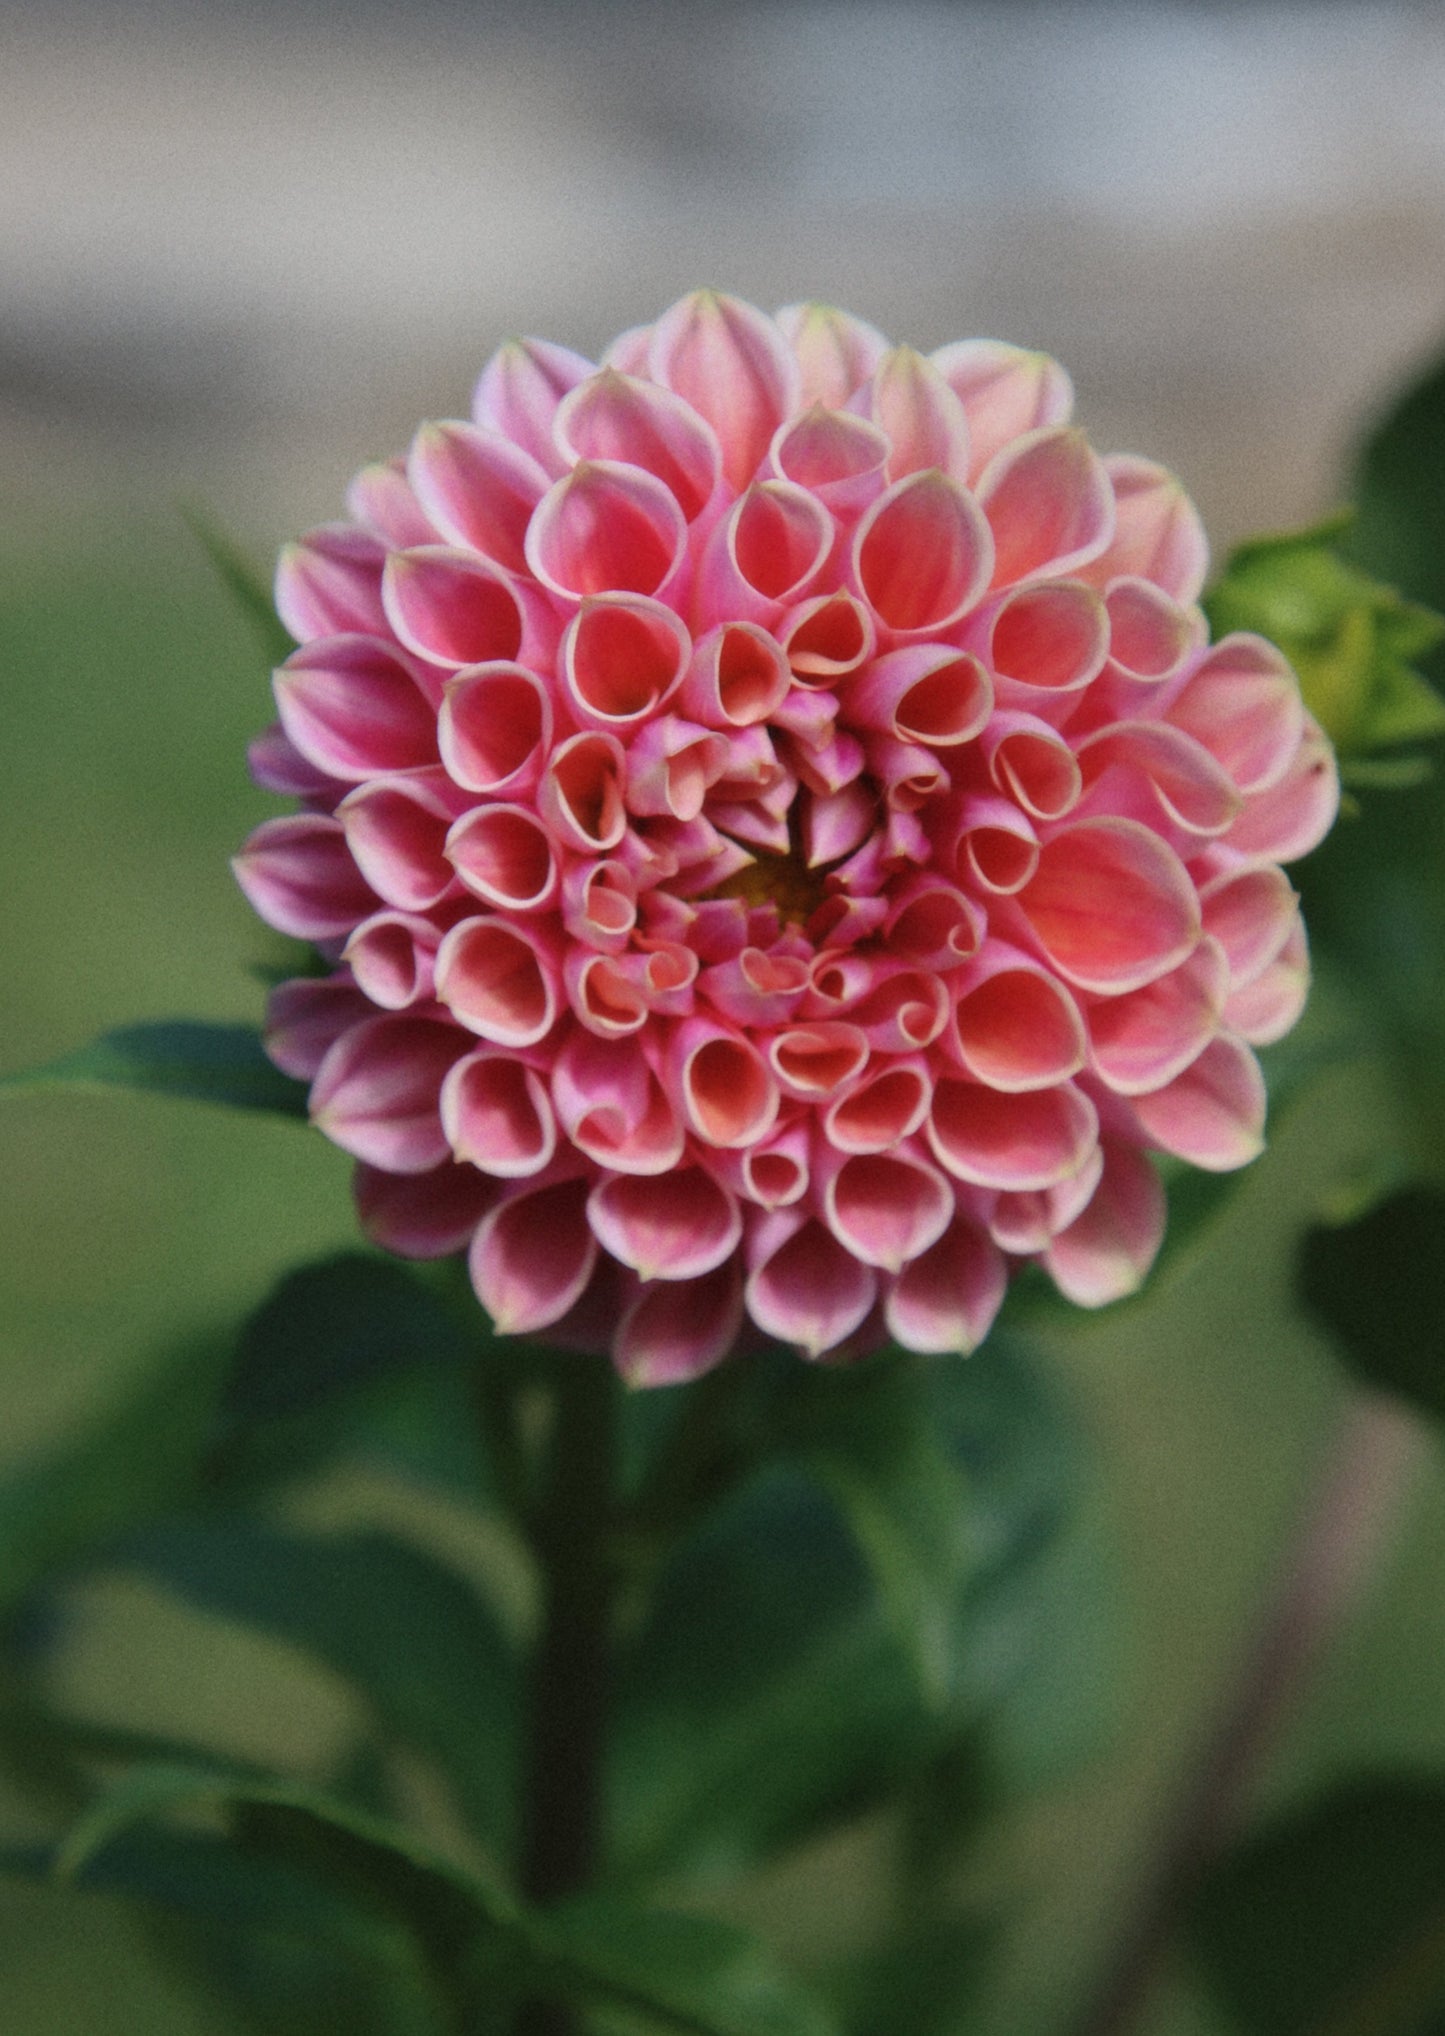 Coseytown Flowers - Leaving these beauties here to make your Monday a  little bit brighter. ❤️ #coseytowndahlias Dahlia: an dahlia seedling named Bermuda  Pink.